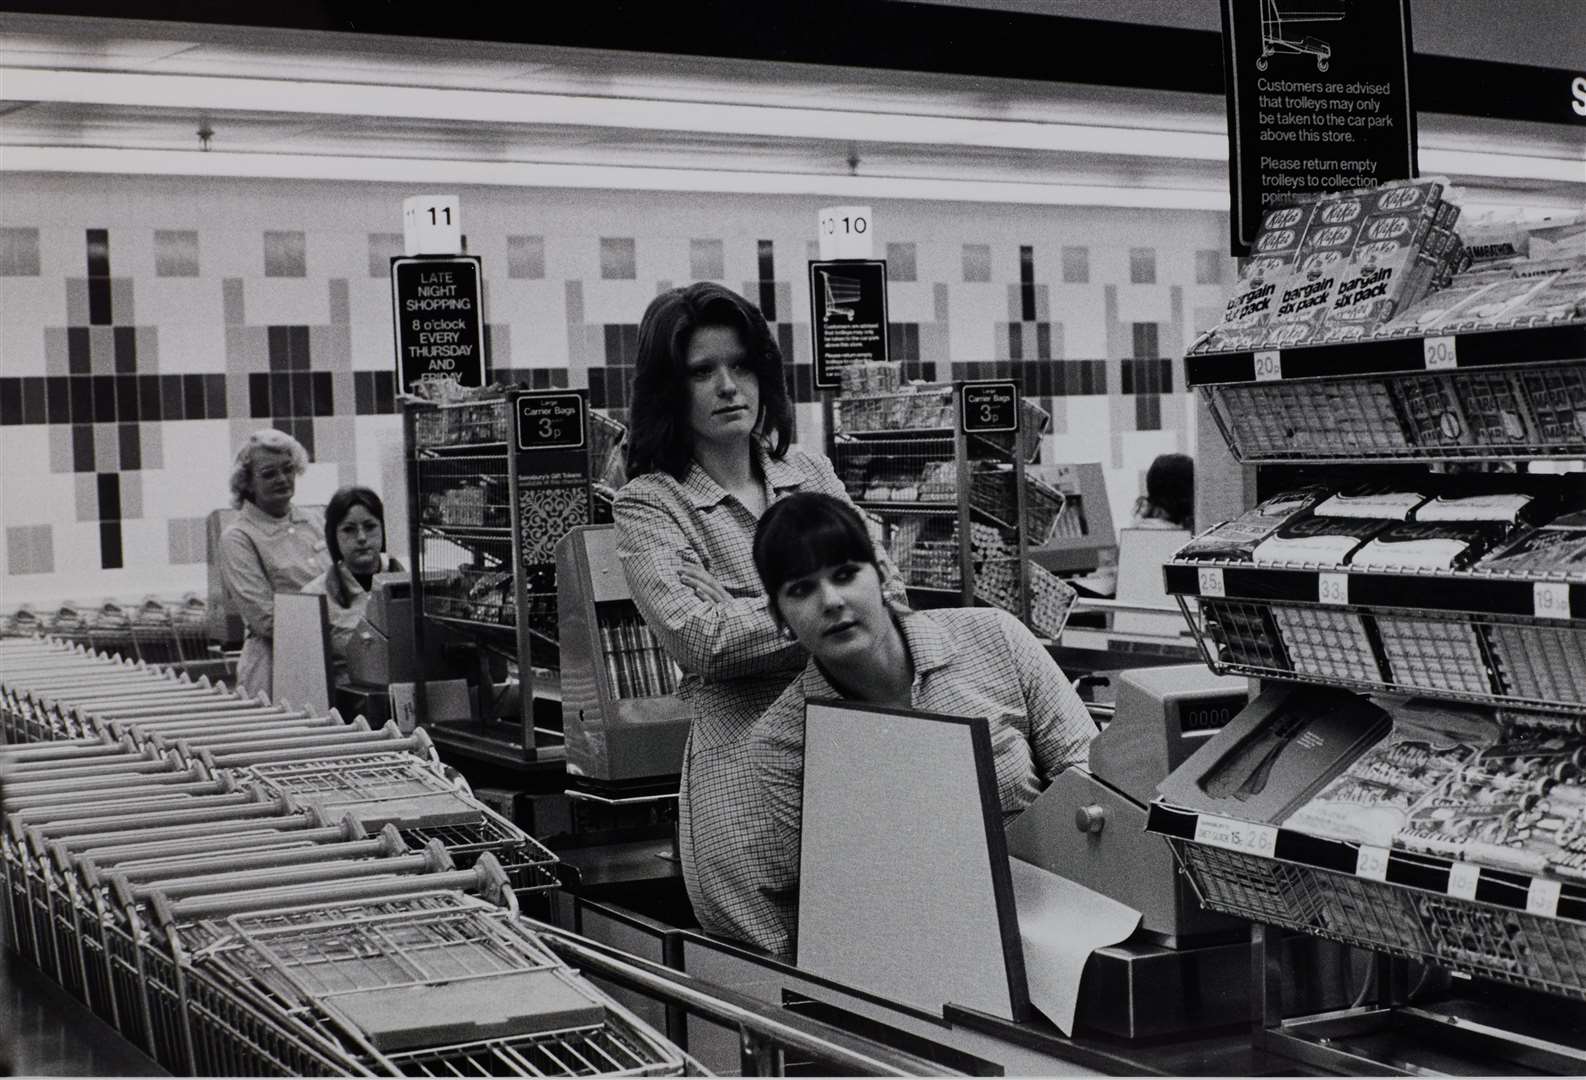 Cashiers get ready for customers in Pentagon Court, Chatham, in 1976. Picture: The Sainsbury Archive, Museum of London Docklands